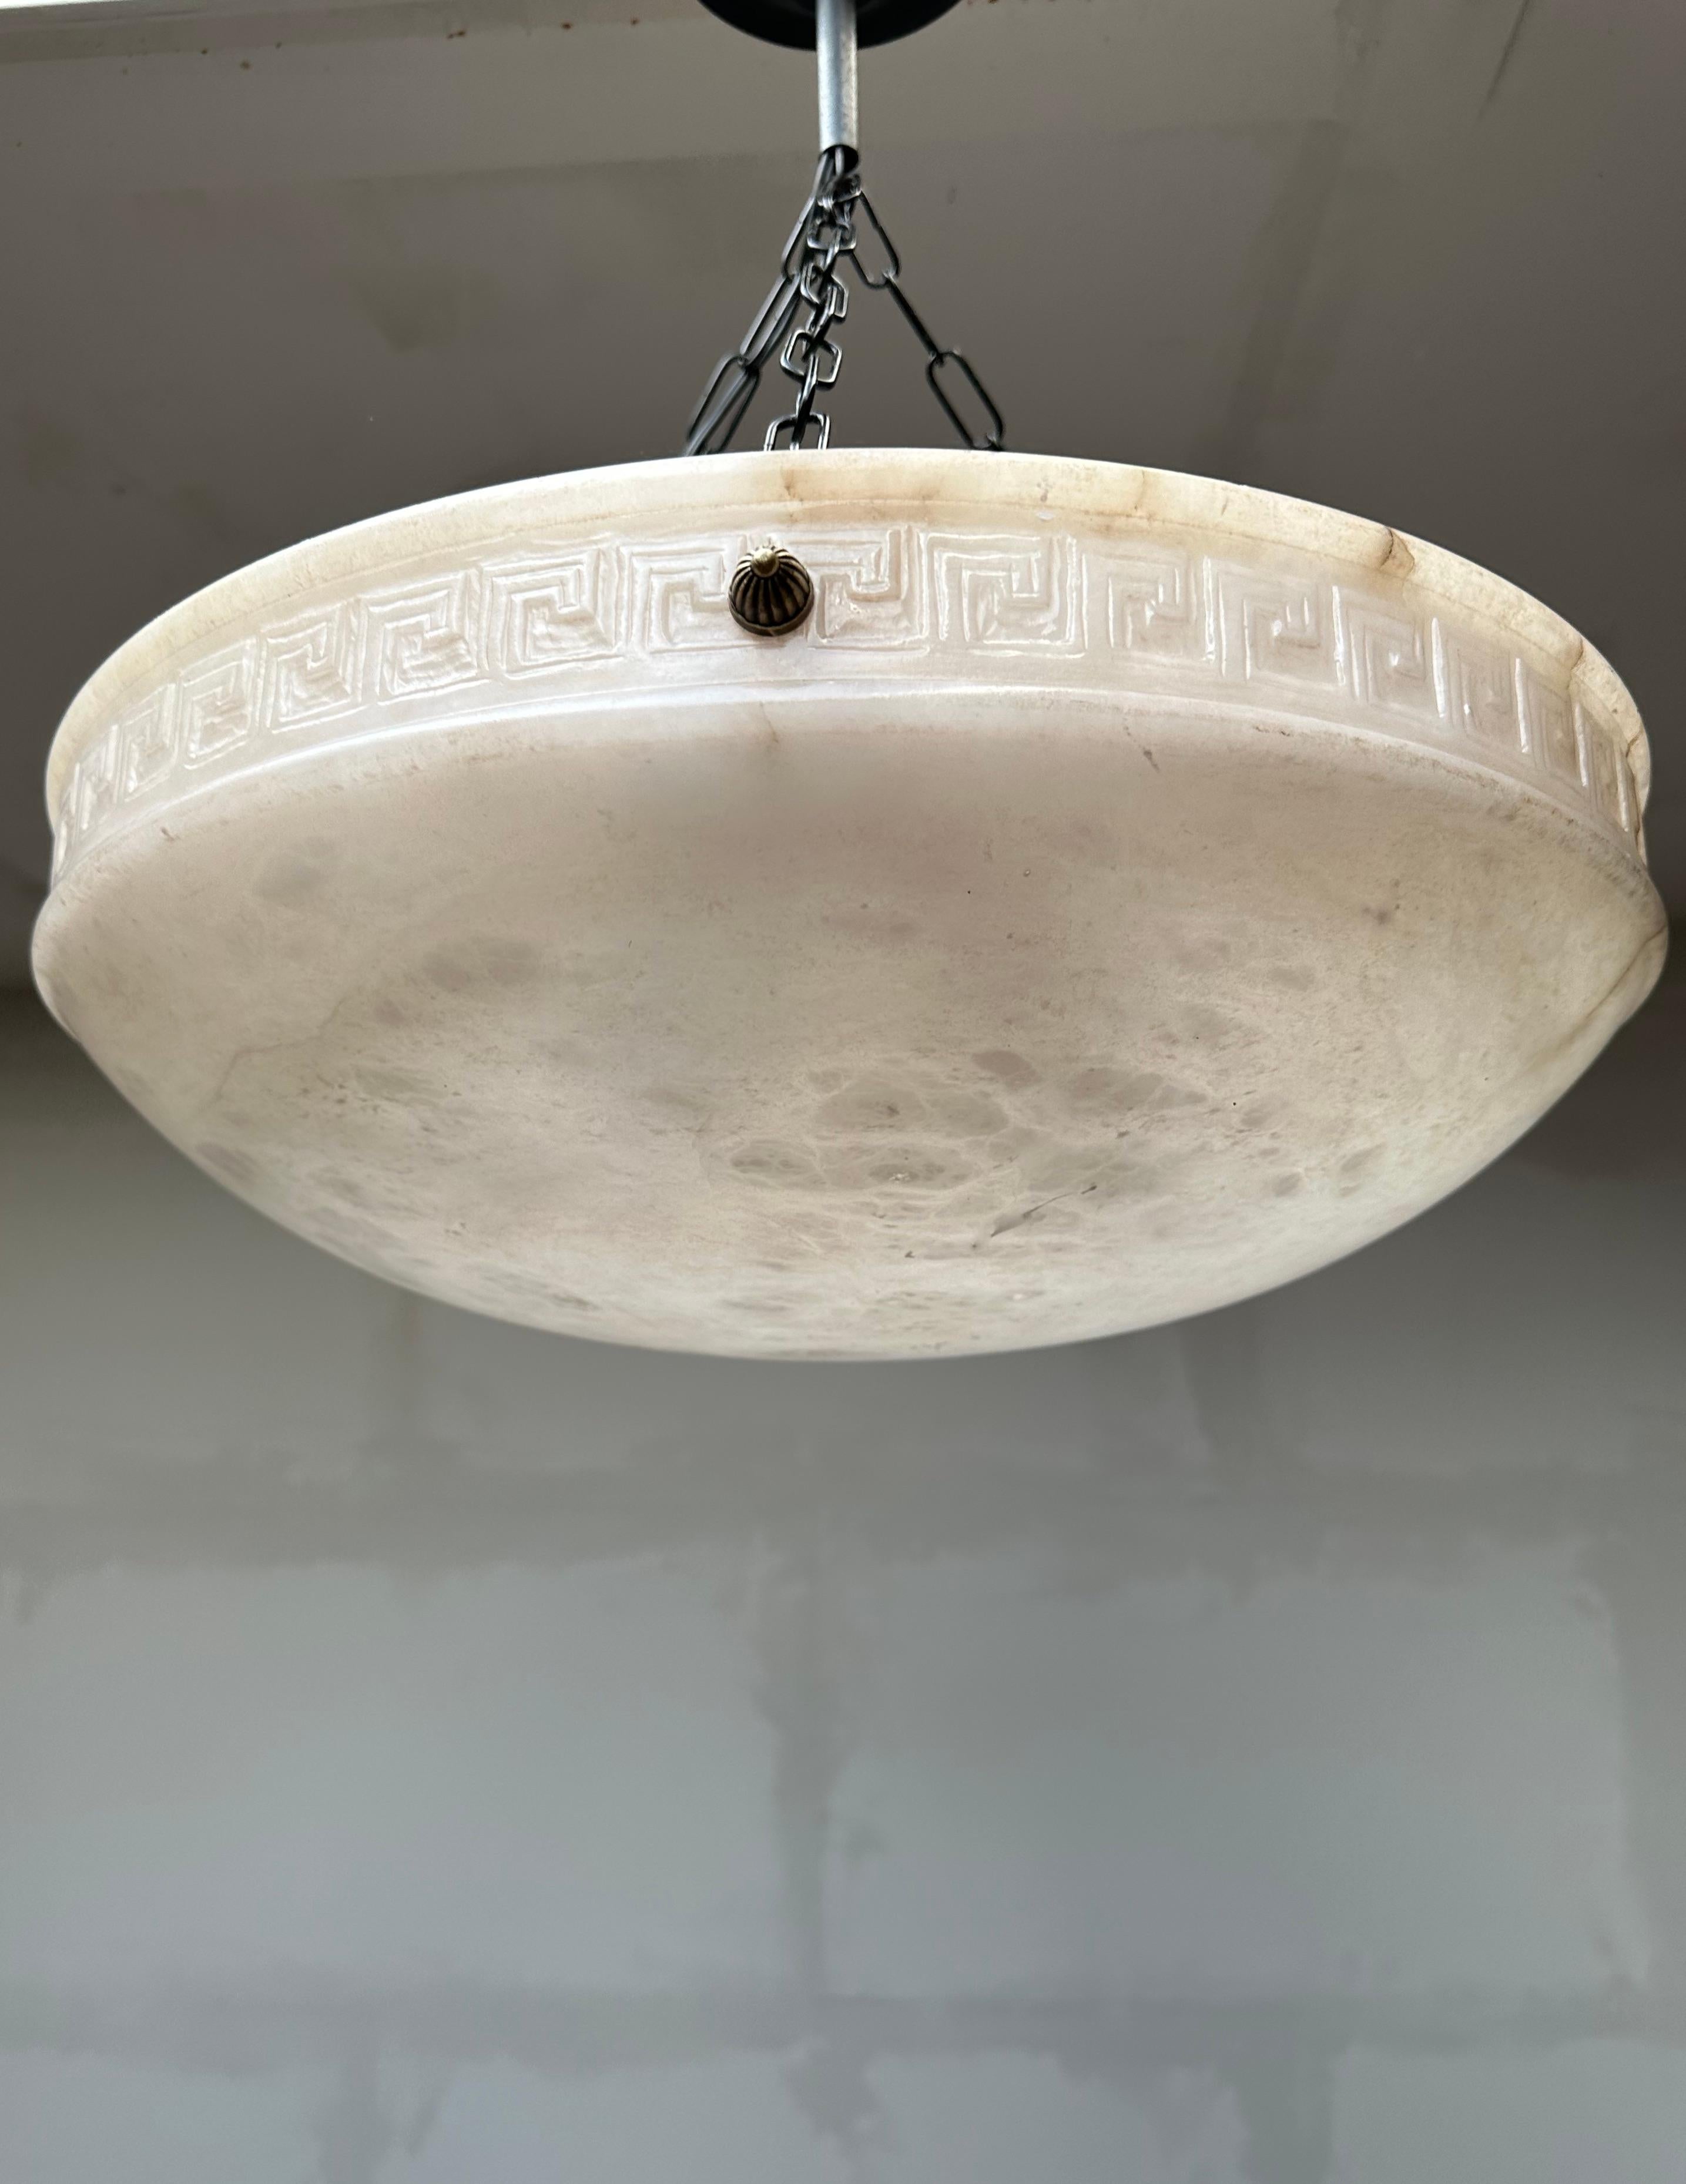 Rare and majestic, three light white alabaster pendant.

This large size flush mount comes with a stunning design and perfectly polished alabaster shade. This beautifully balanced alabaster light fixture is designed in such a way that the three